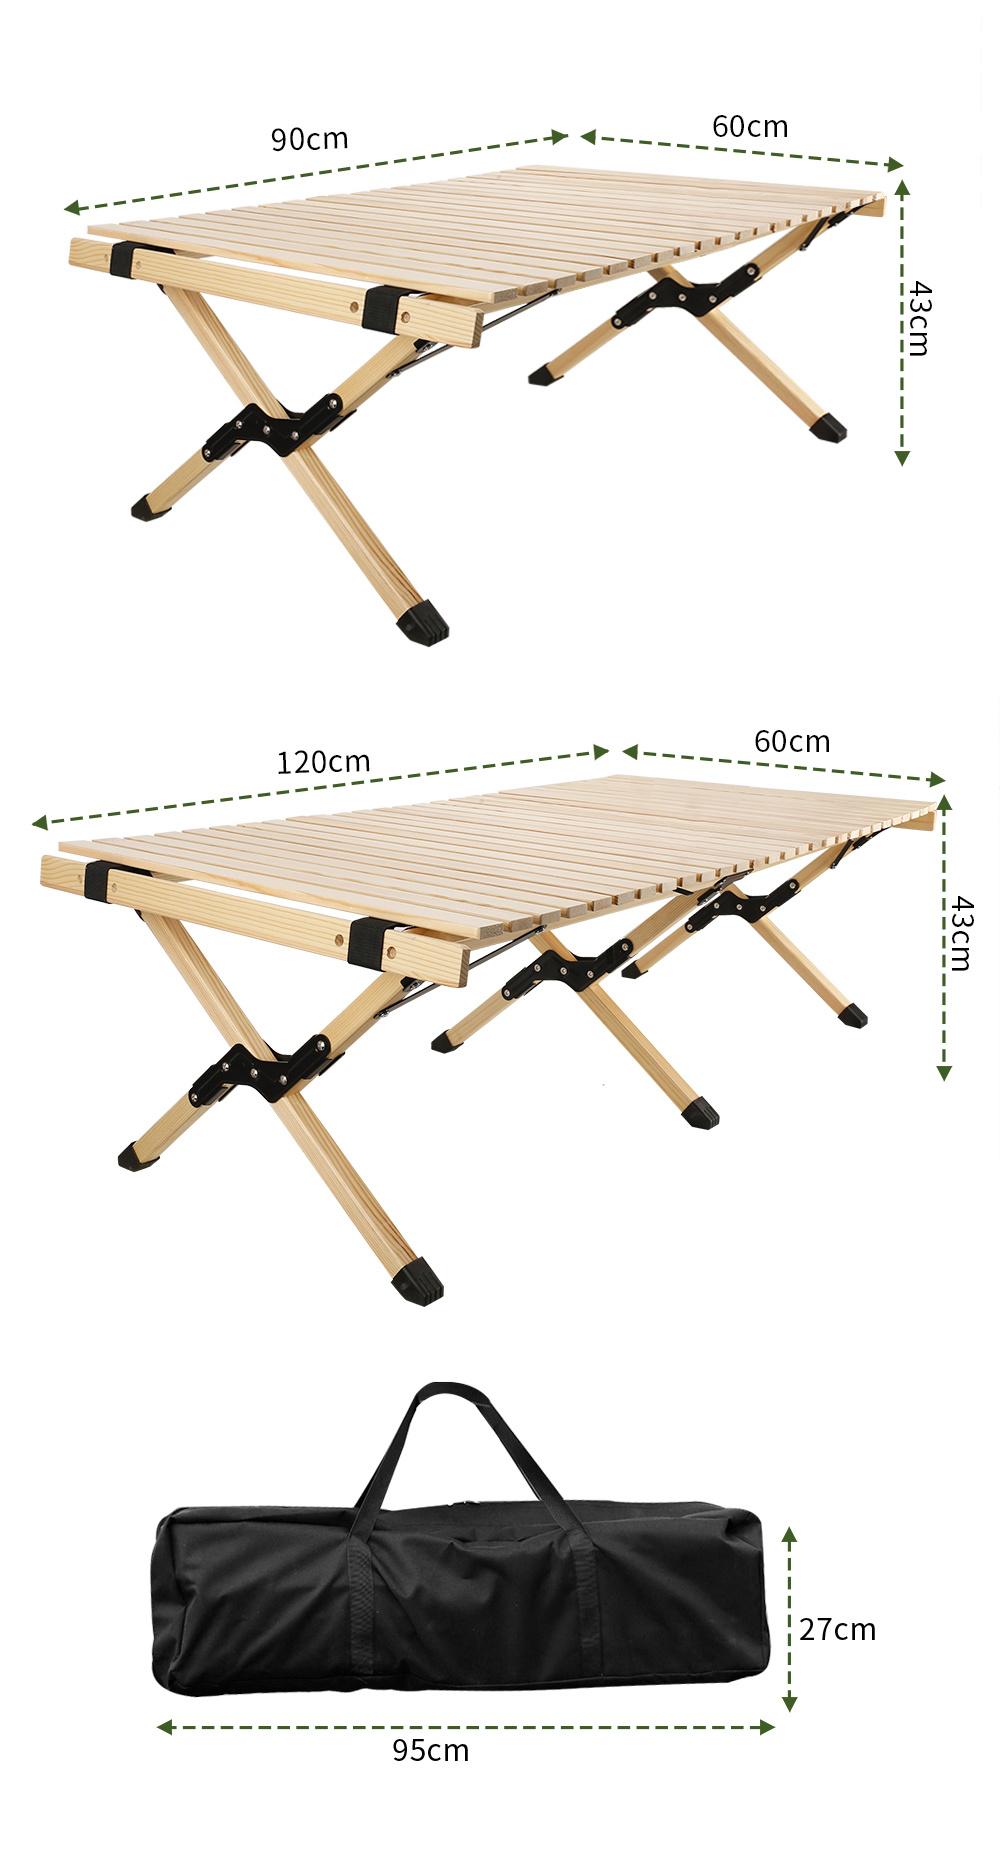 2022 Outdoor Camping Table High Quality Solid Wood Foldable Table